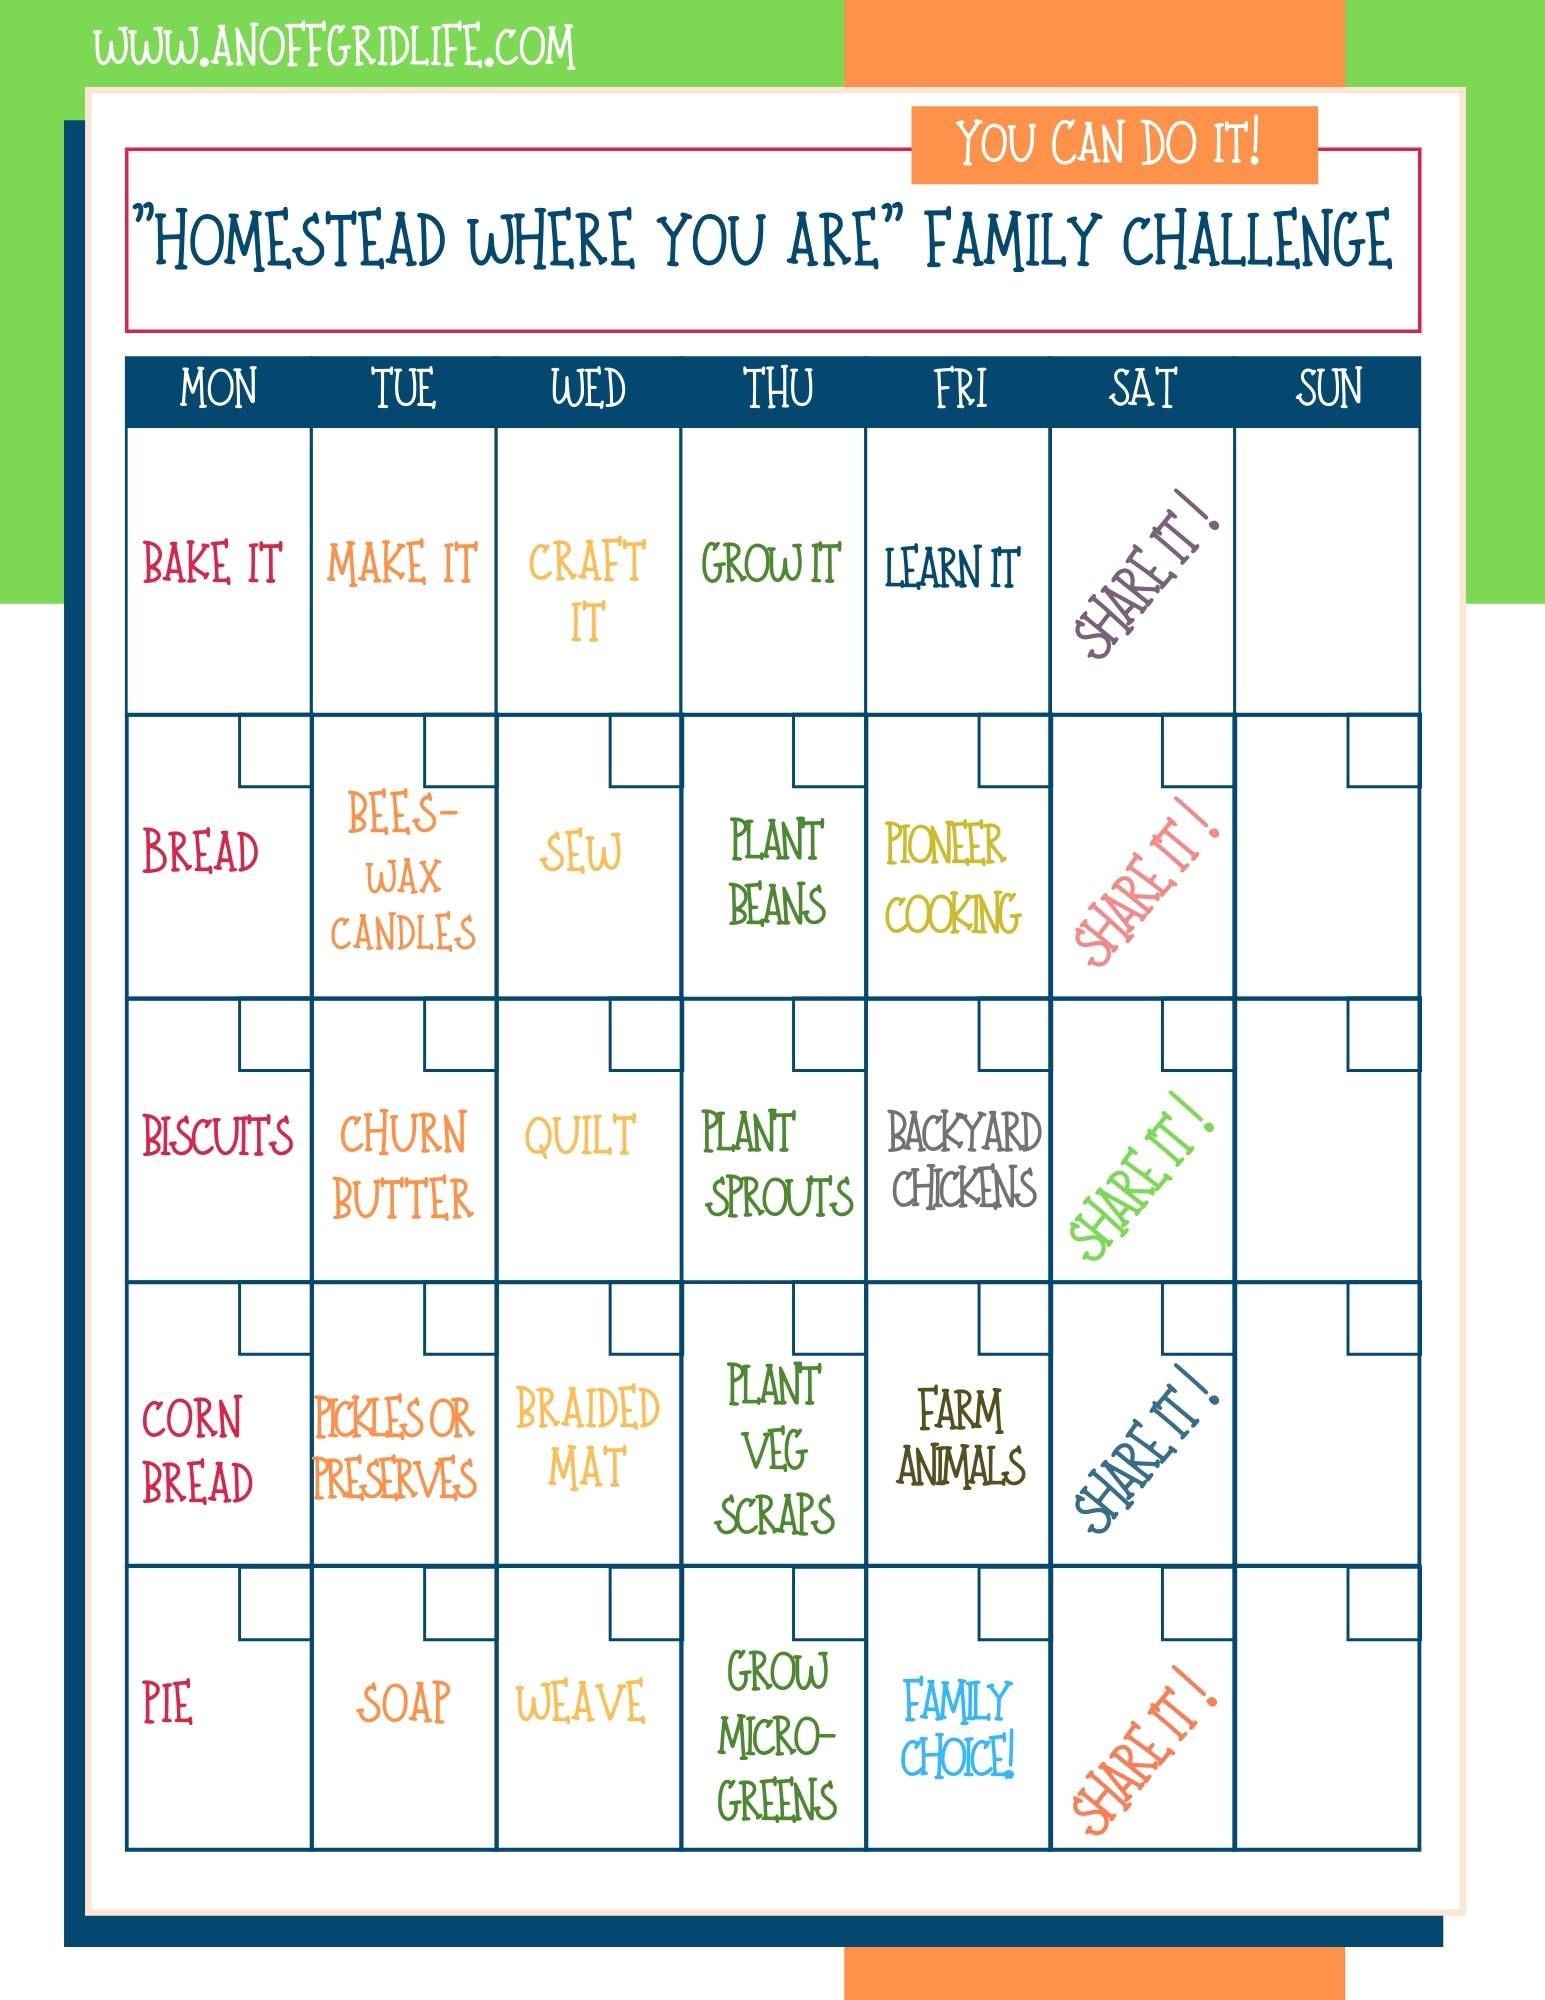 The "Homestead Where You Are" Challenge Calendar!